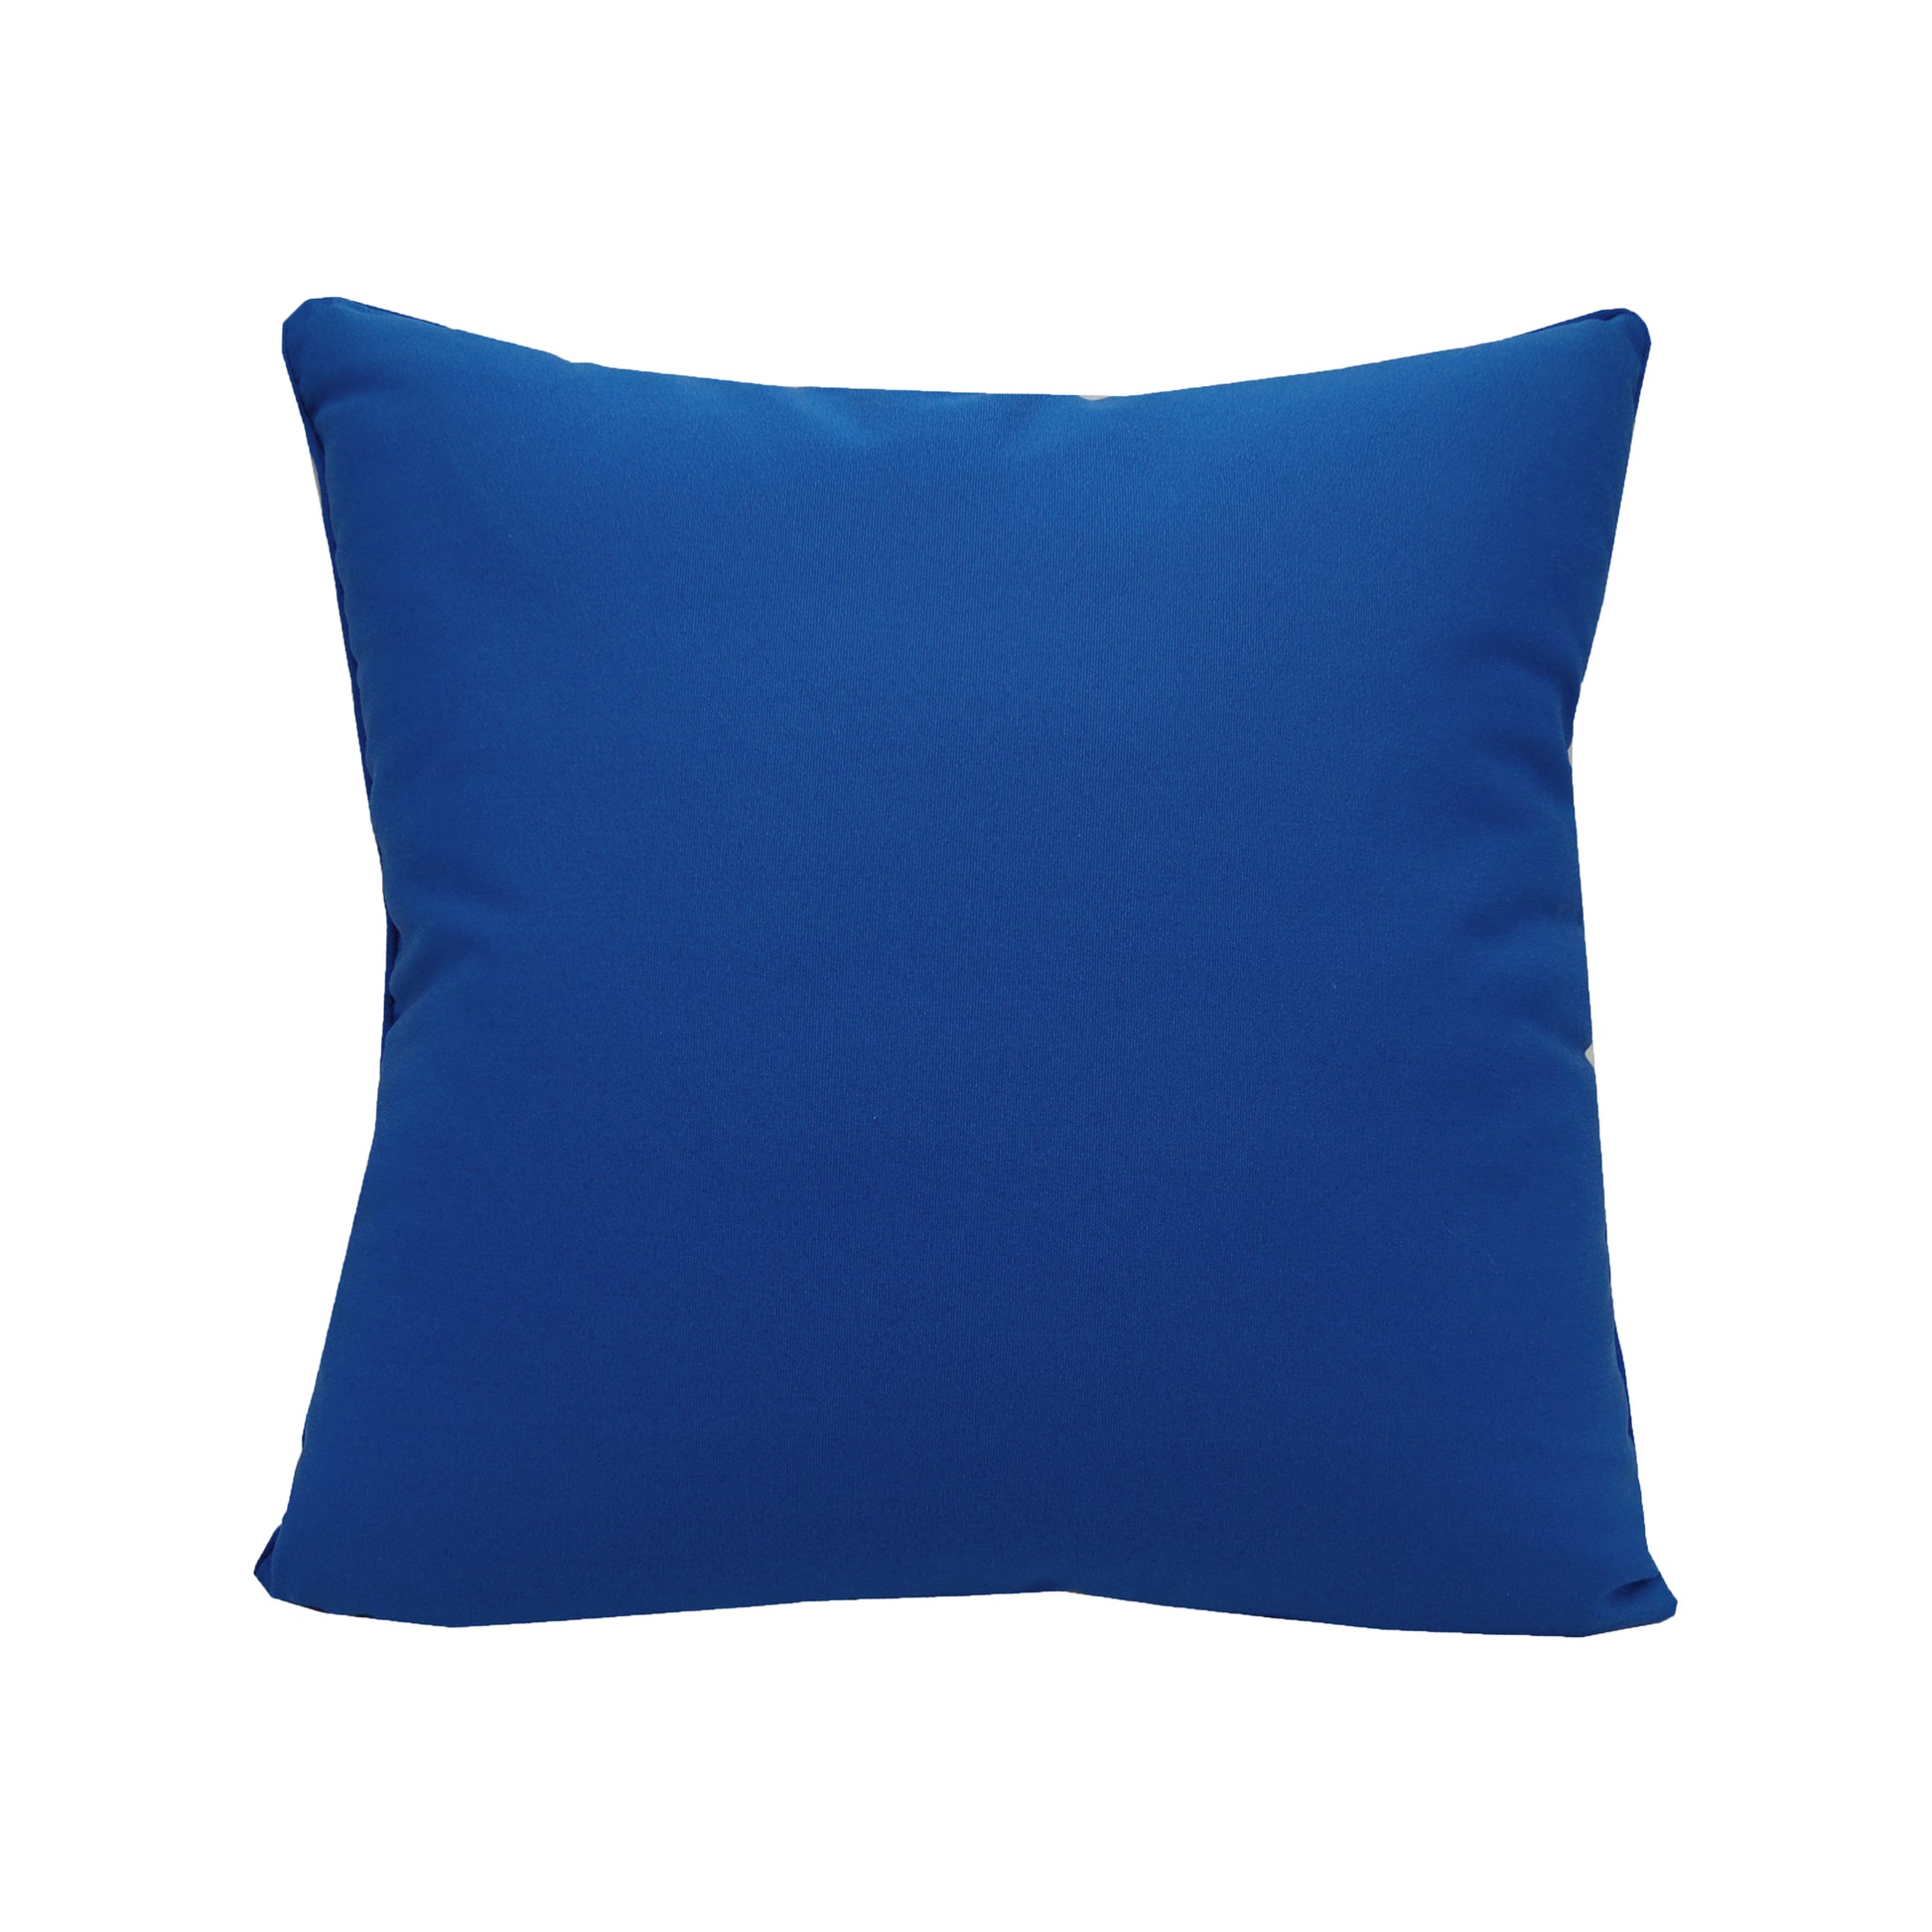 Solid blue fabric; back side of Blue Sea Star pillow.